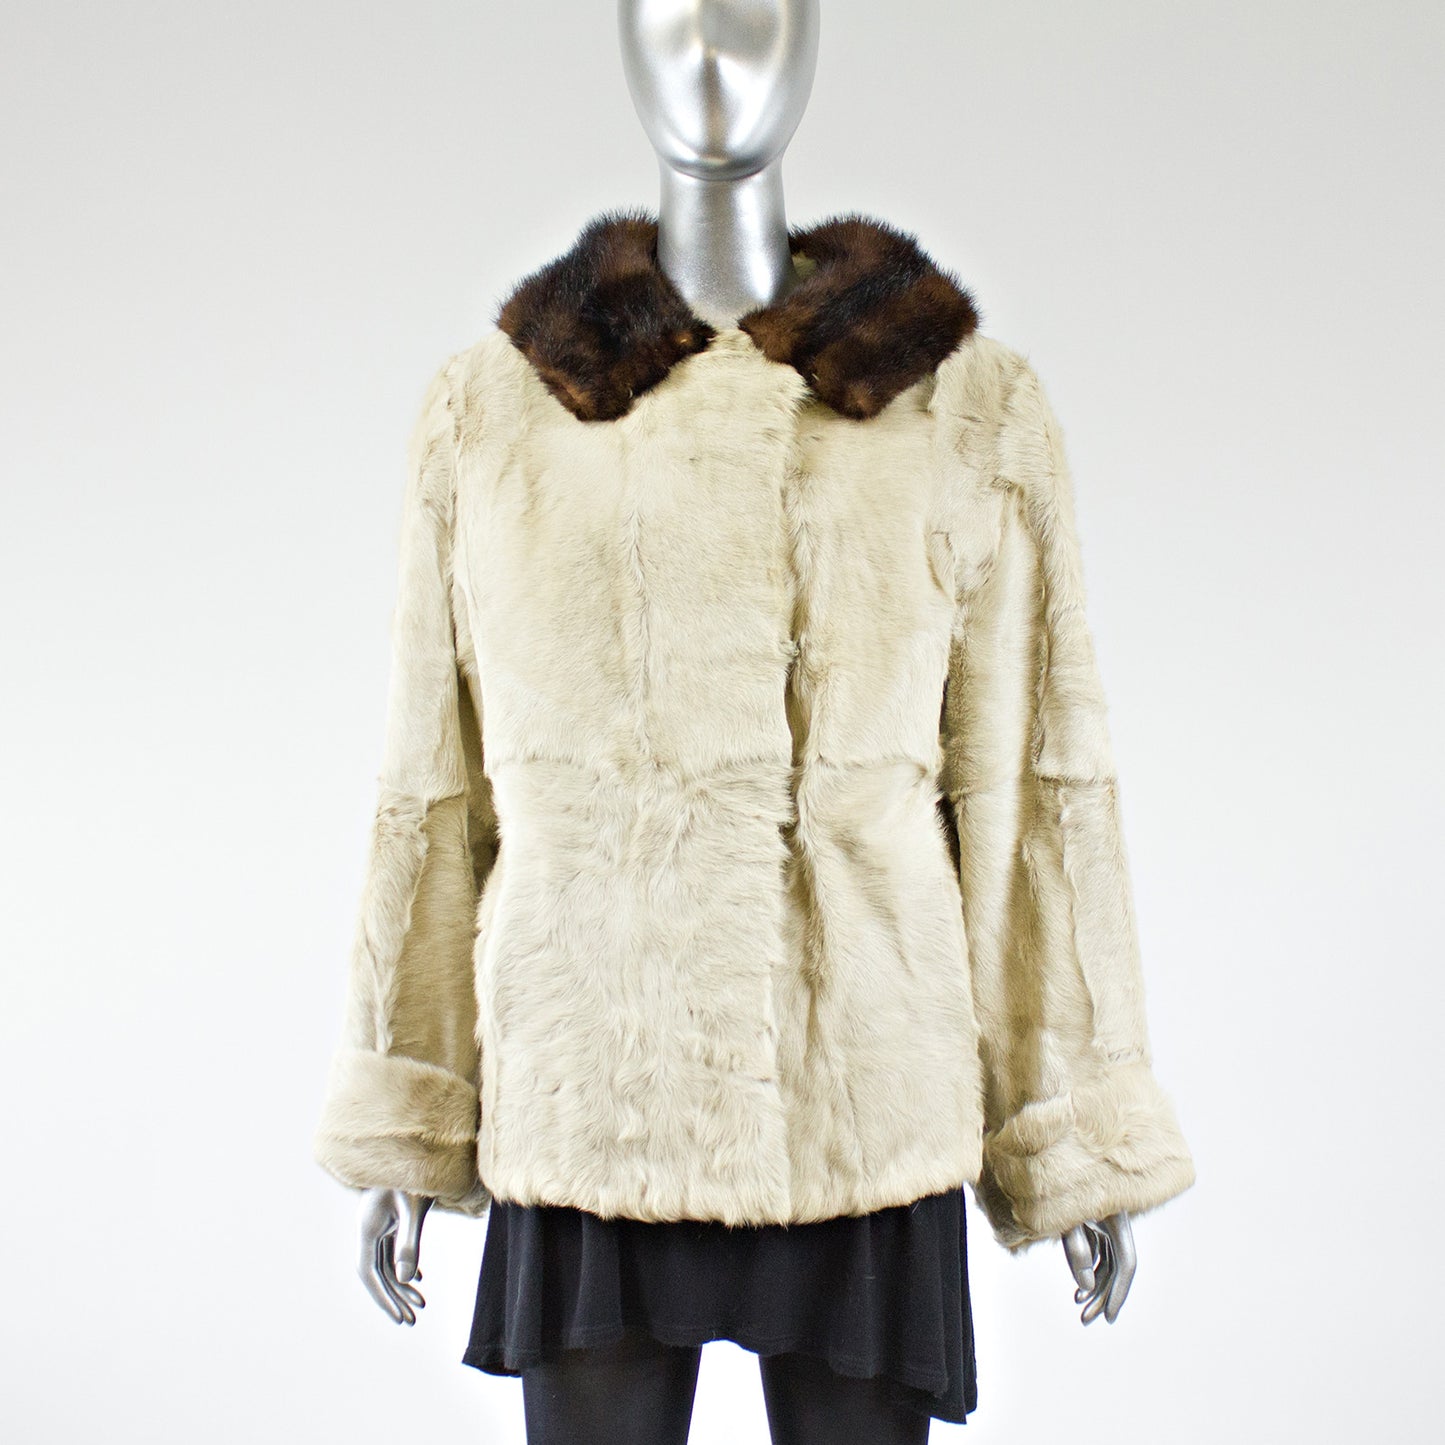 Beige Goat Kid Skin with Mink Fur Collar Jacket - Size S - Pre-Owned